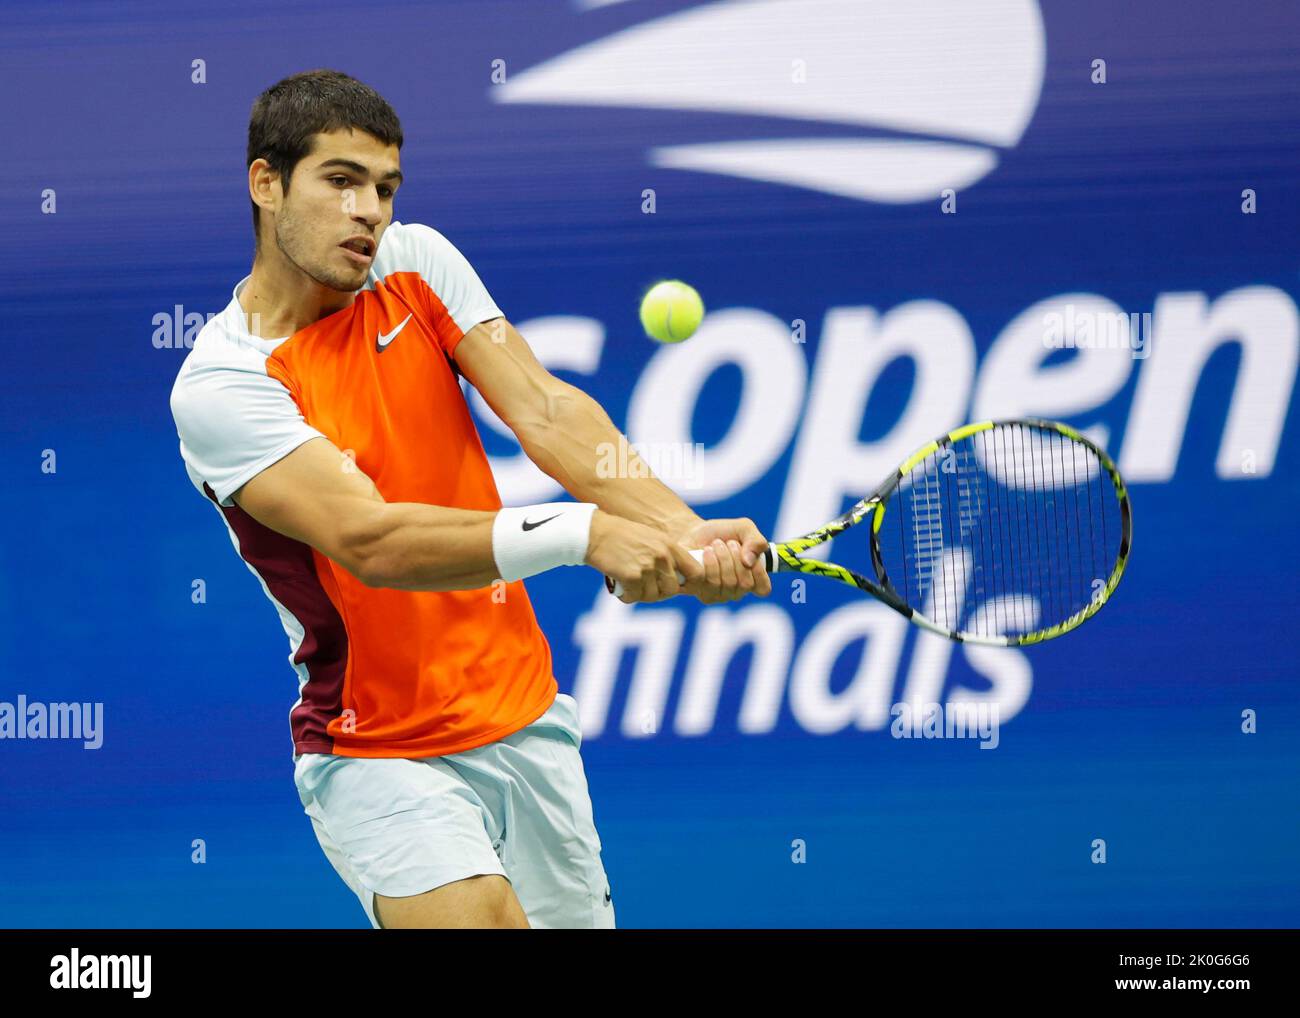 New York, USA, 11th. September 2022. Spanish tennis player Carlos Alcaraz in action during the Men’s Final of the  US  Open  Championships,Billie Jean King National Tennis Center on Sunday 11 September 2022. © Juergen Hasenkopf / Alamy Live News Stock Photo